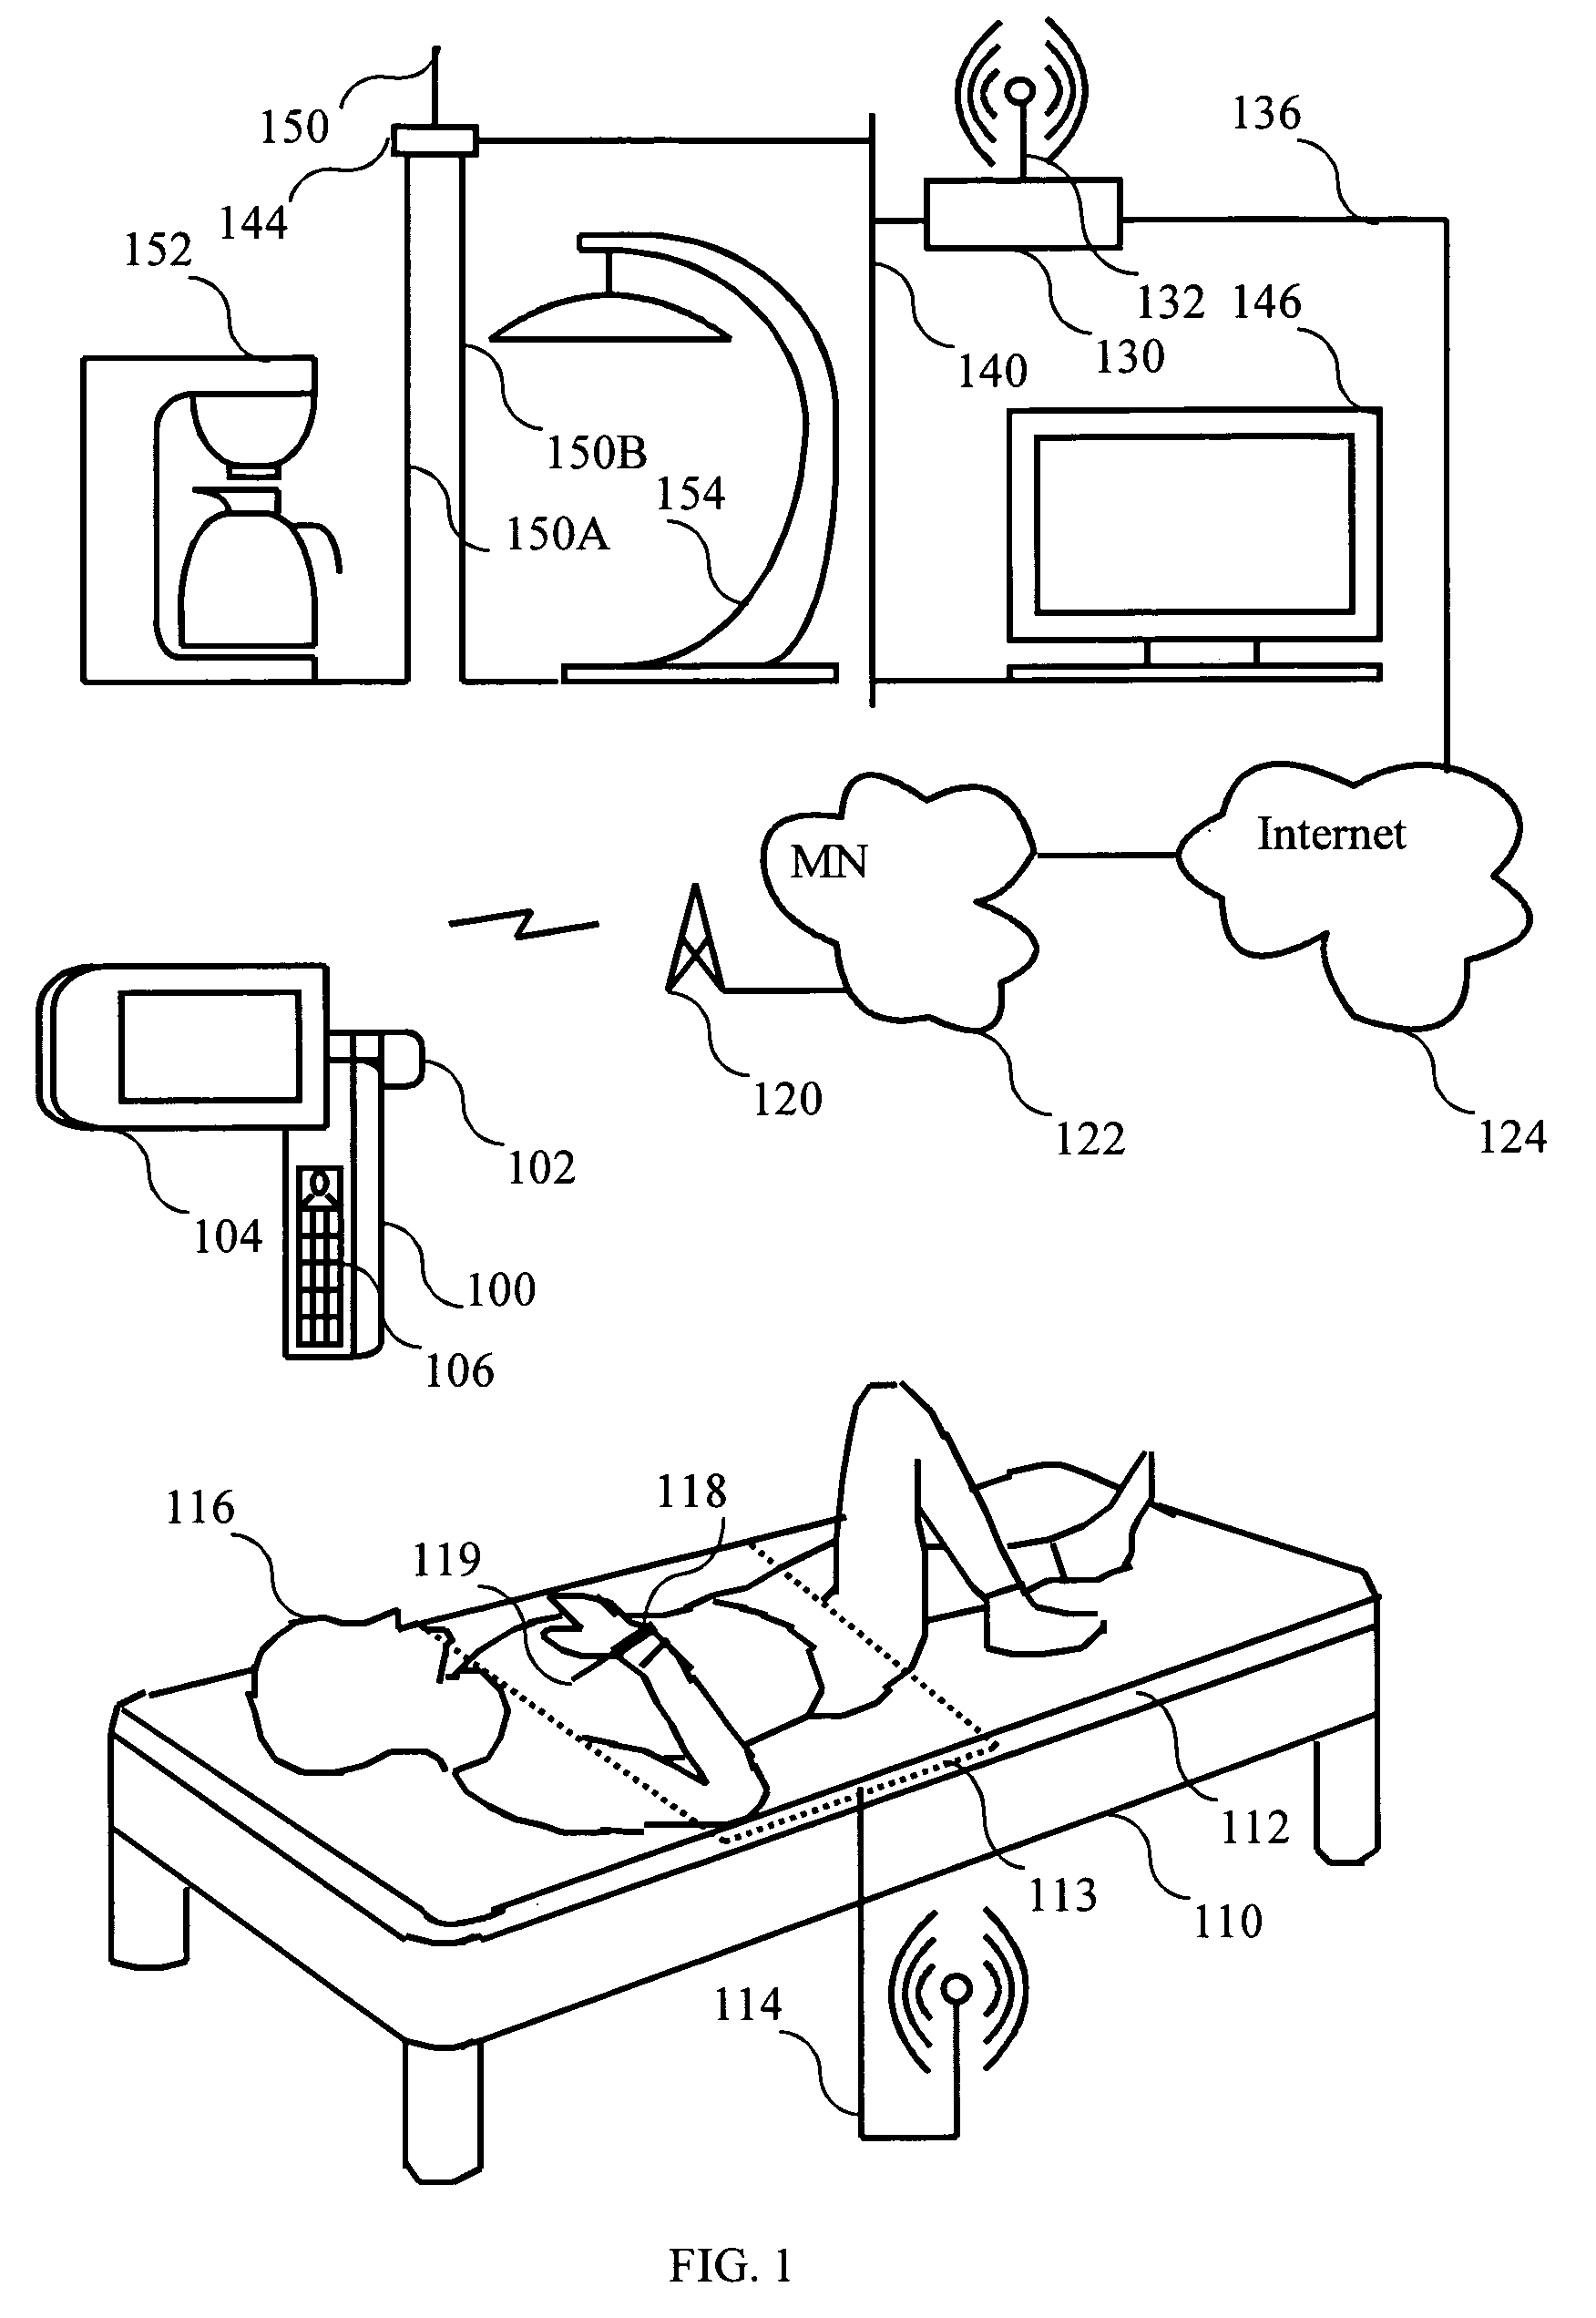 Method for the monitoring of sleep using an electronic device